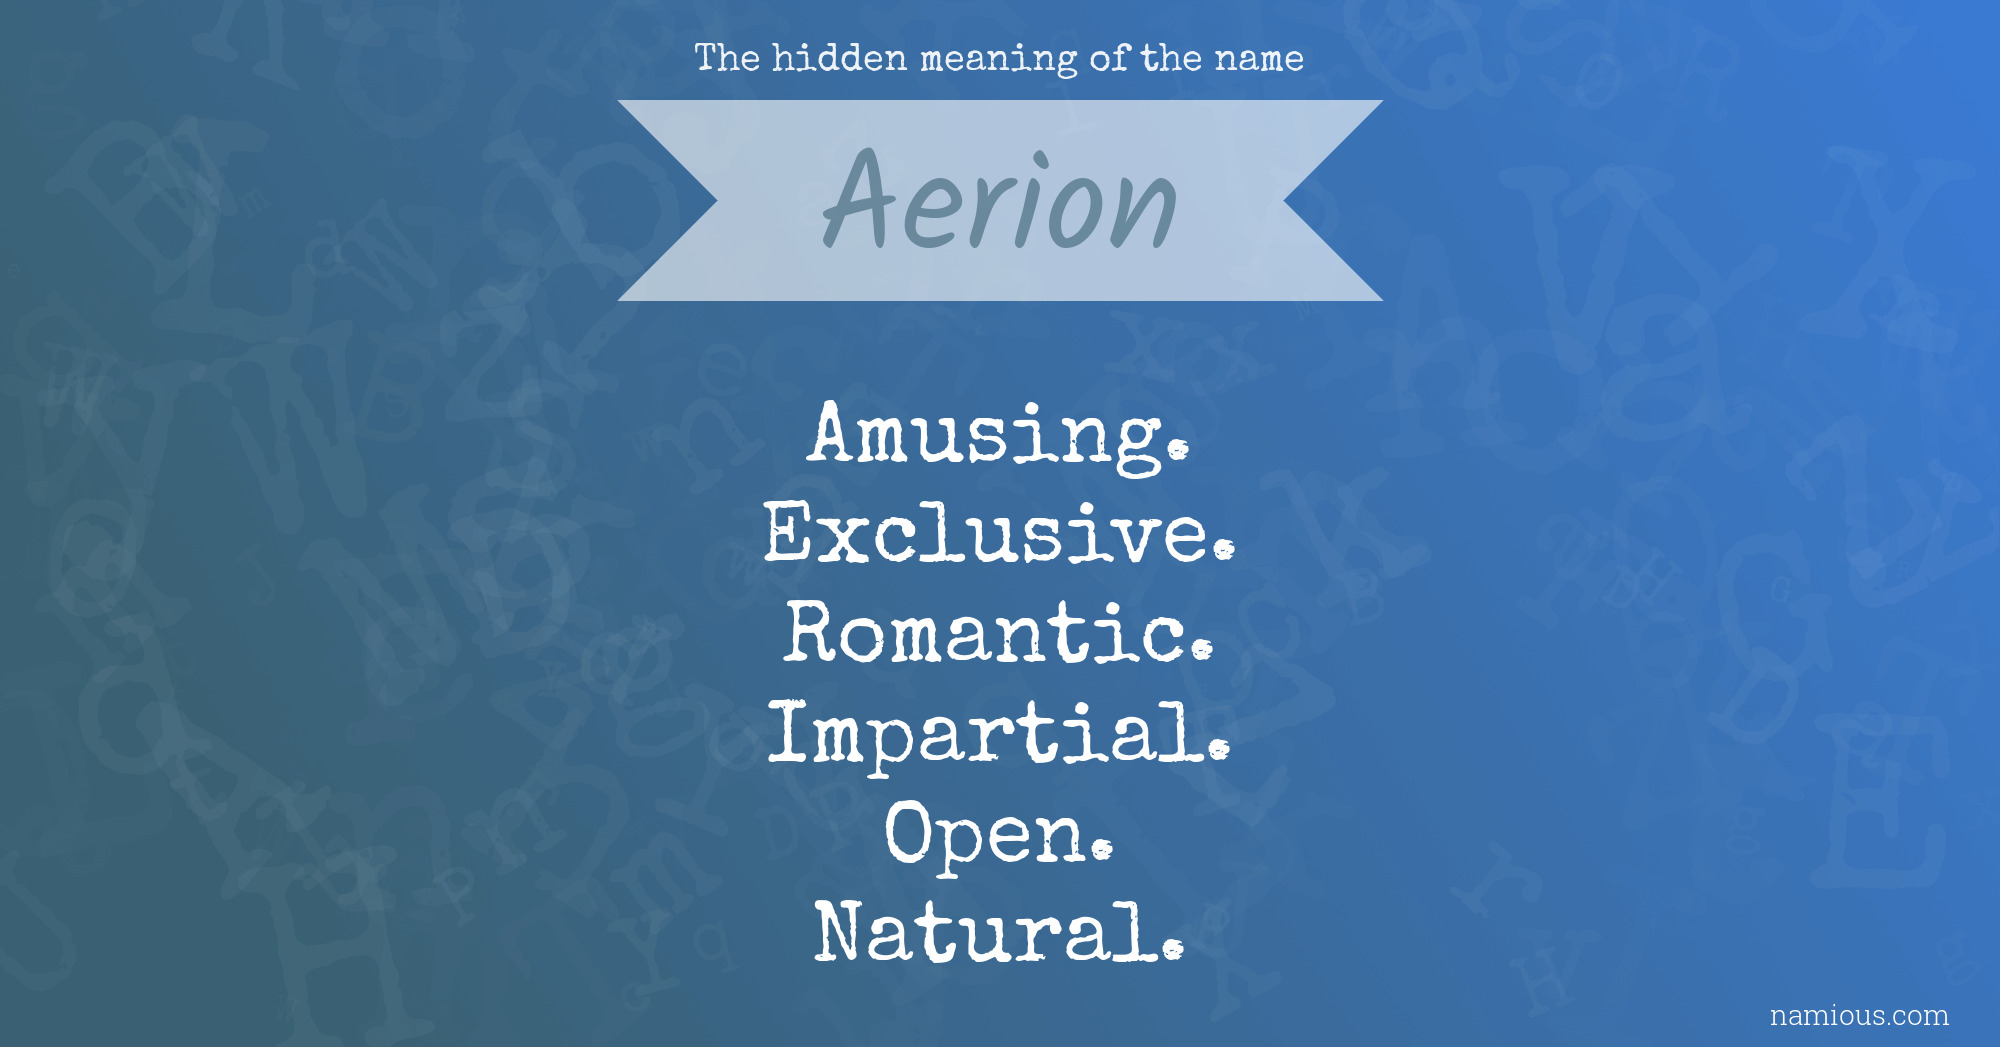 The hidden meaning of the name Aerion